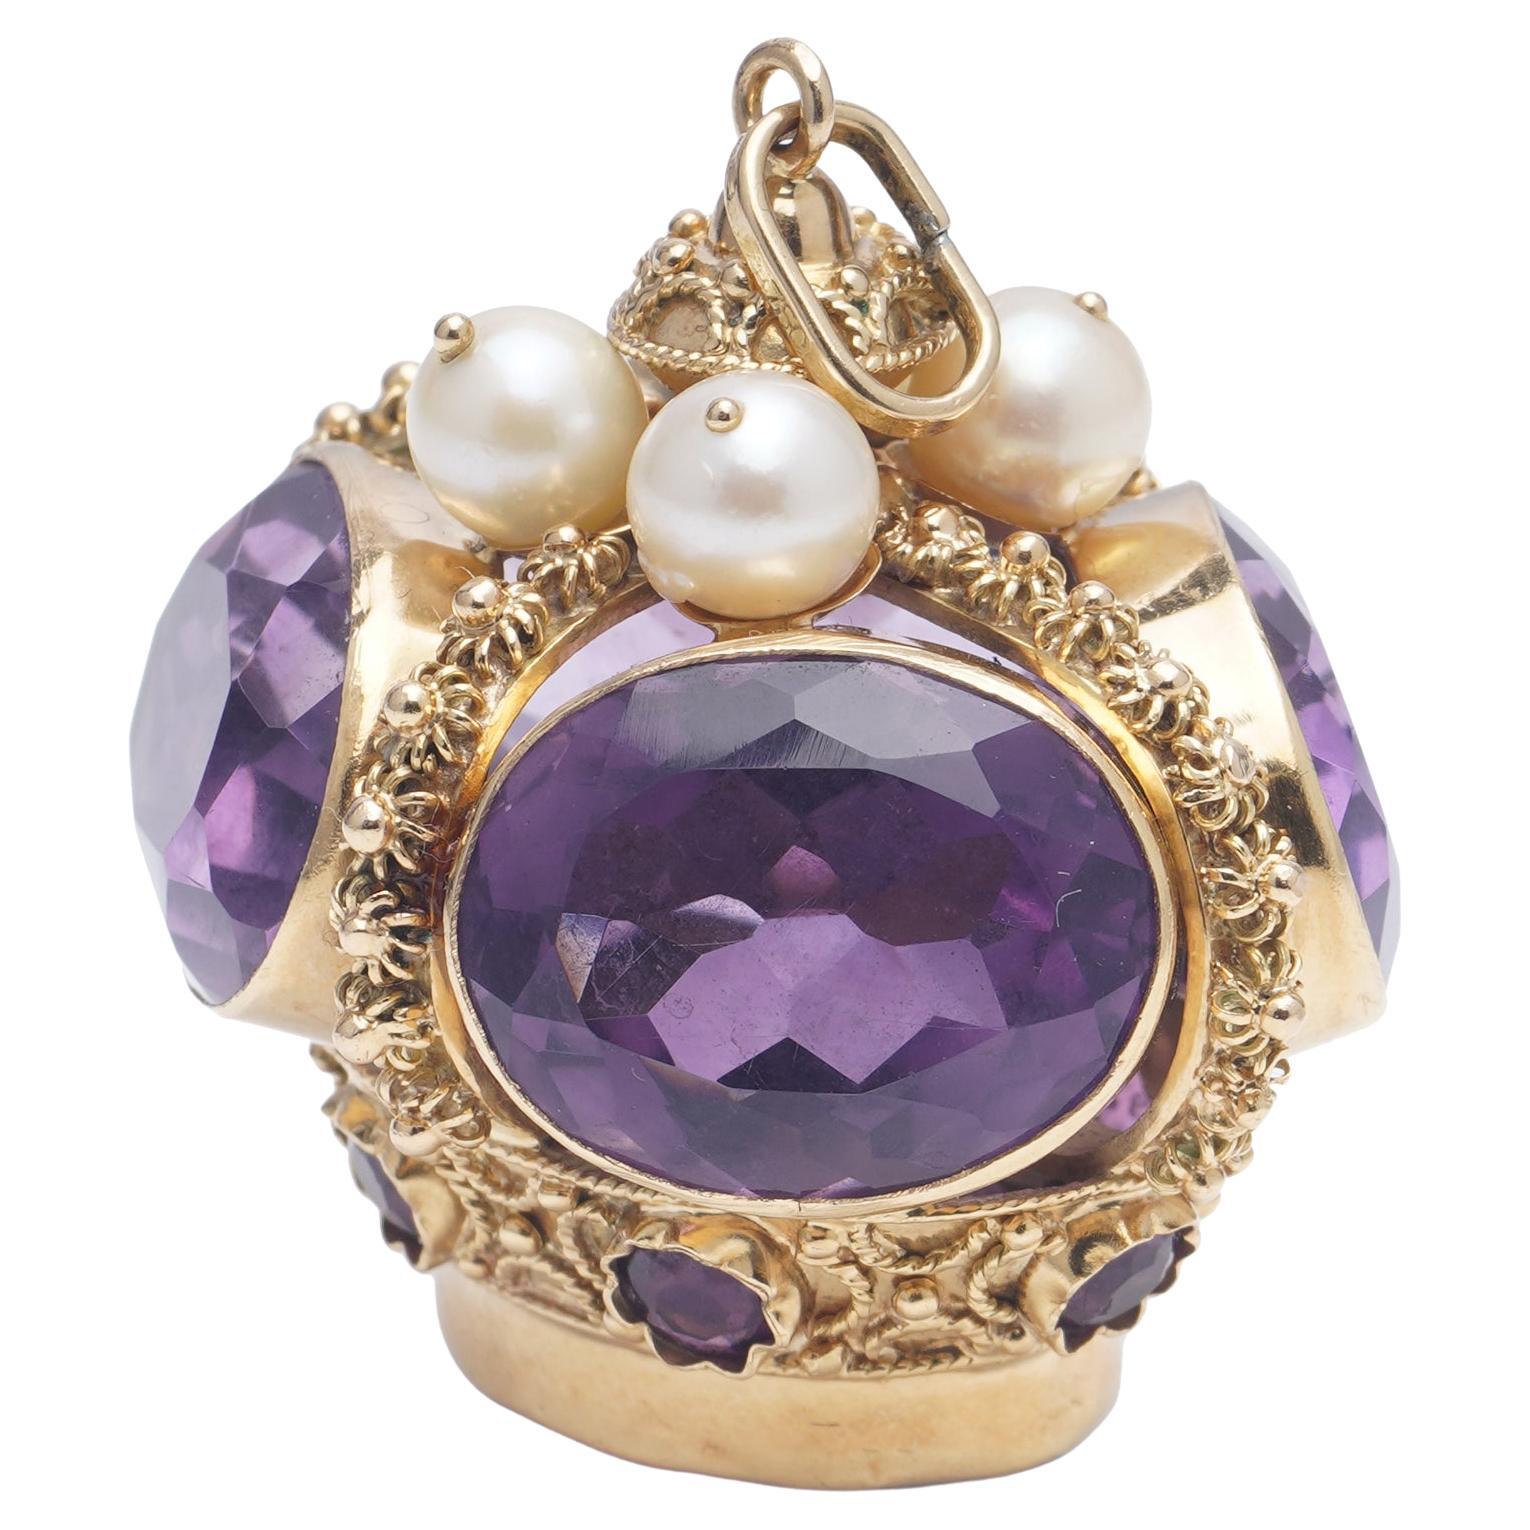 This one-of-a-kind Venetian Etruscan Revival fob is a true work of art. 
Whether you wear it as a bracelet charm, or pendant, or just carry it around in your pocket, this little piece is sure to make a big statement.
Created in Italy with 18kt